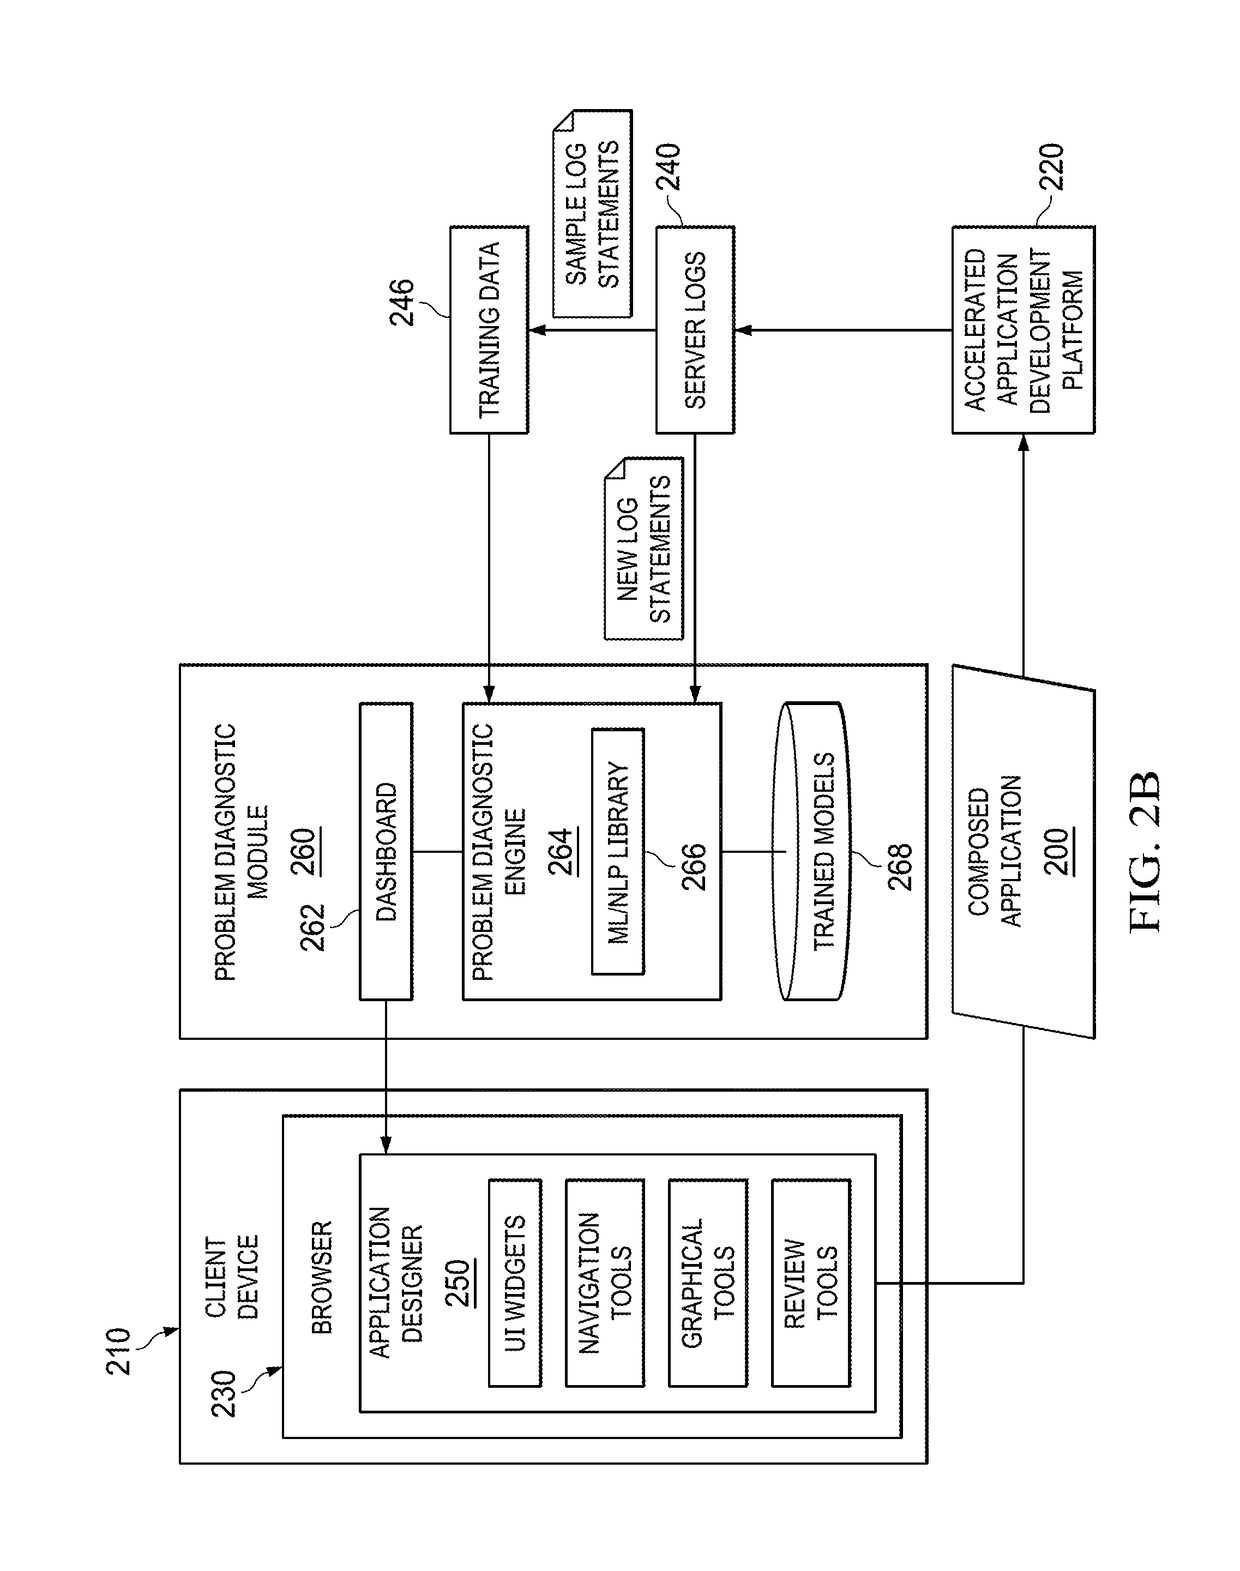 Systems and methods for diagnosing problems from error logs using natural language processing